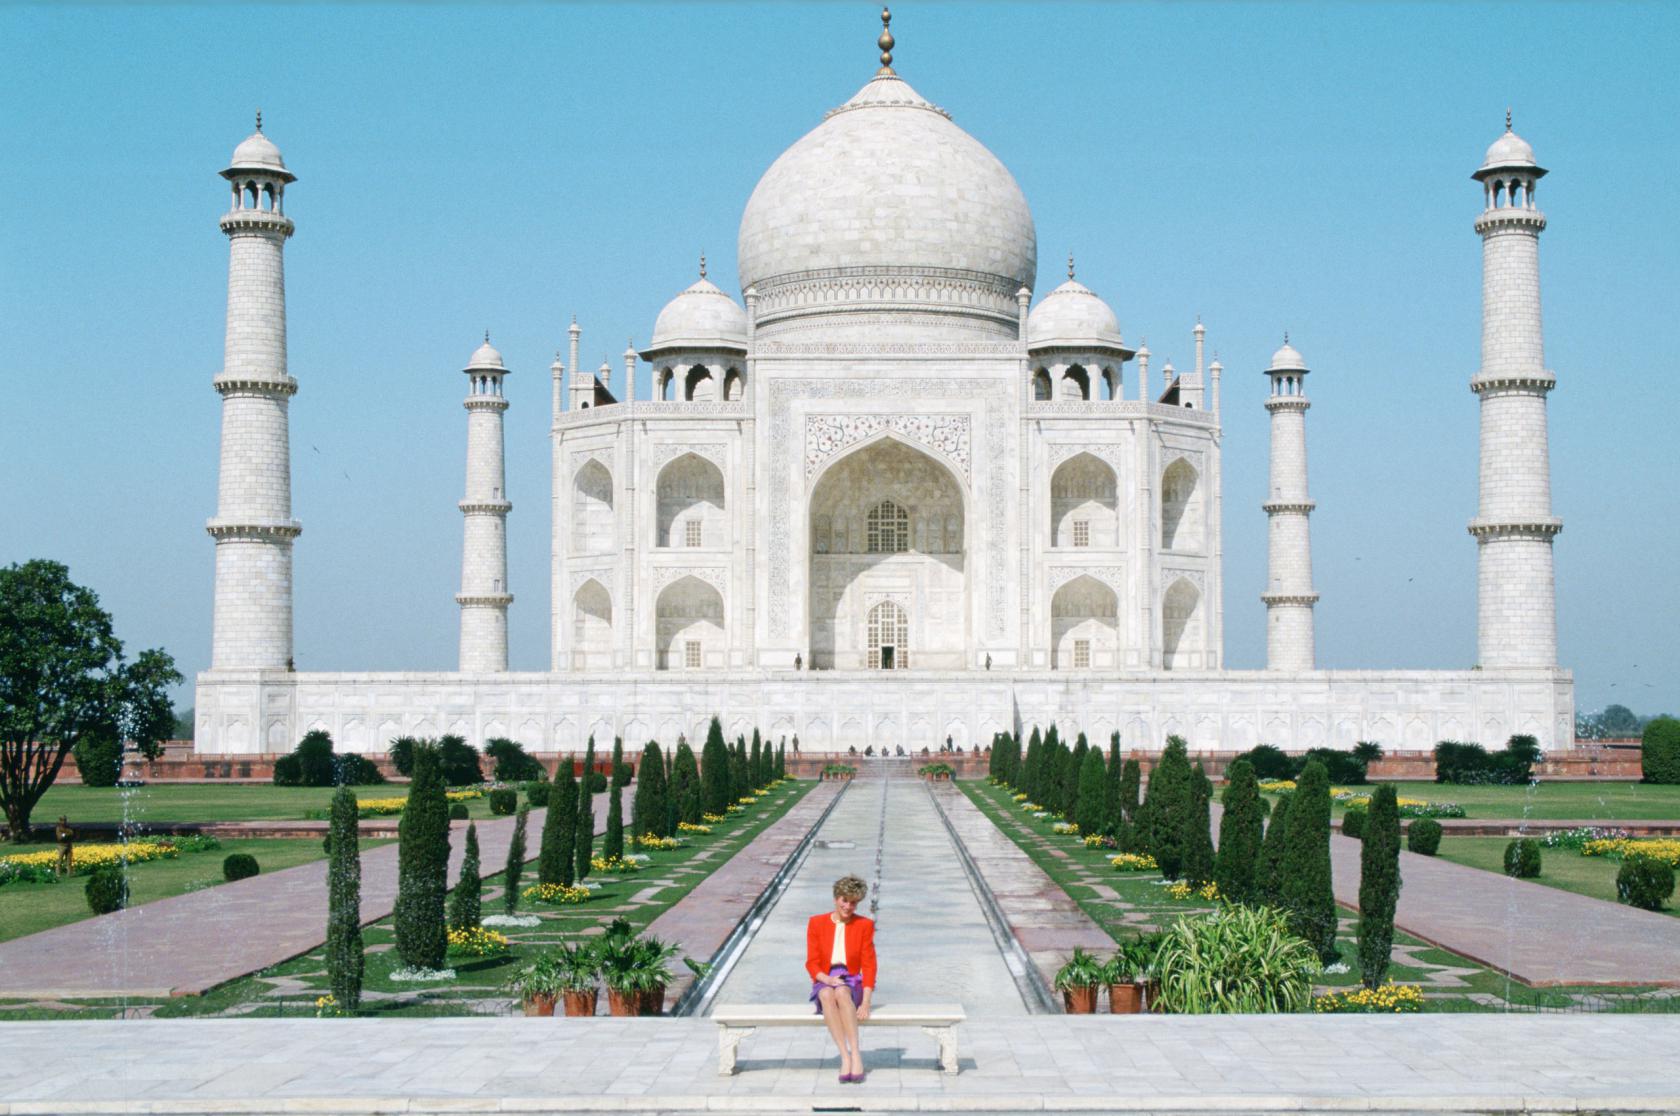 INDIA - FEBRUARY 11:  Diana Princess of Wales sits in front of the Taj Mahal during a visit to India  (Photo by Tim Graham/Getty Images)